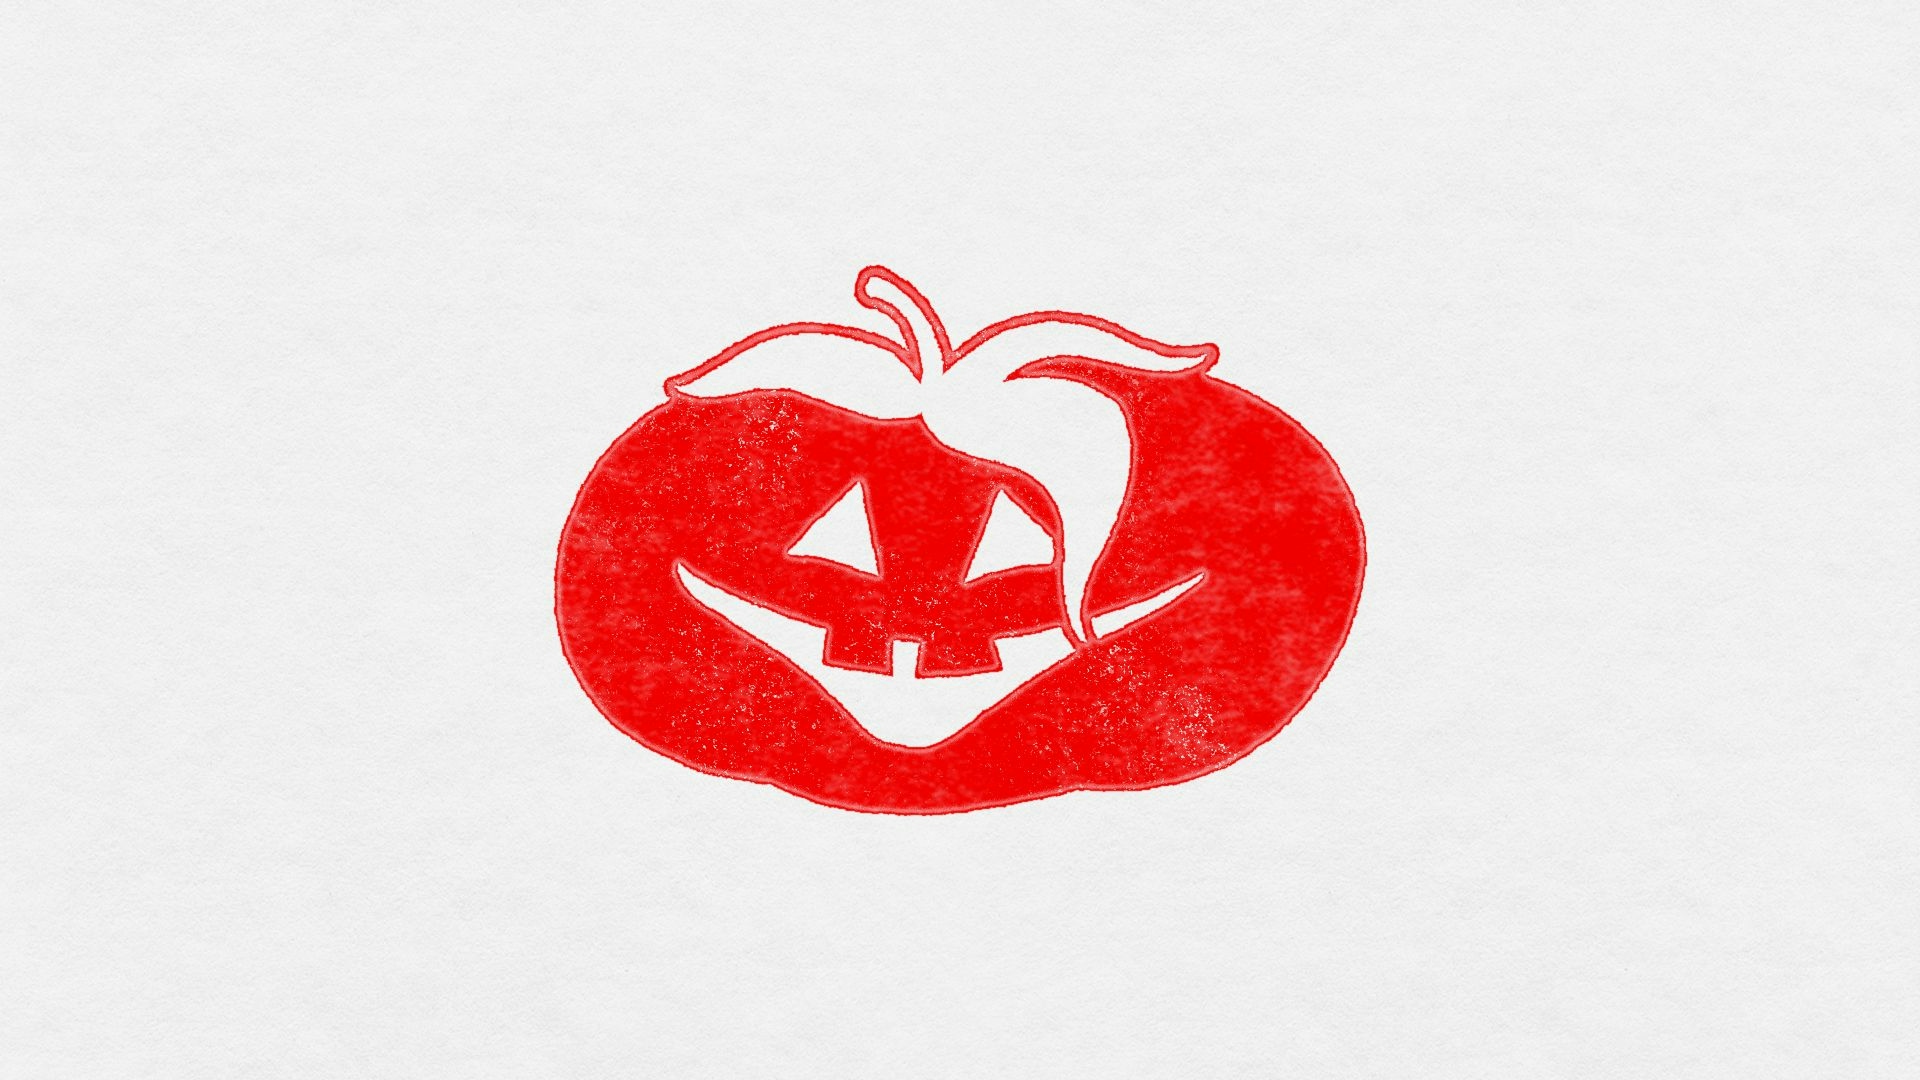 TNT Pizza tomato jack-o-lantern from the Brand Identity & Packaging project